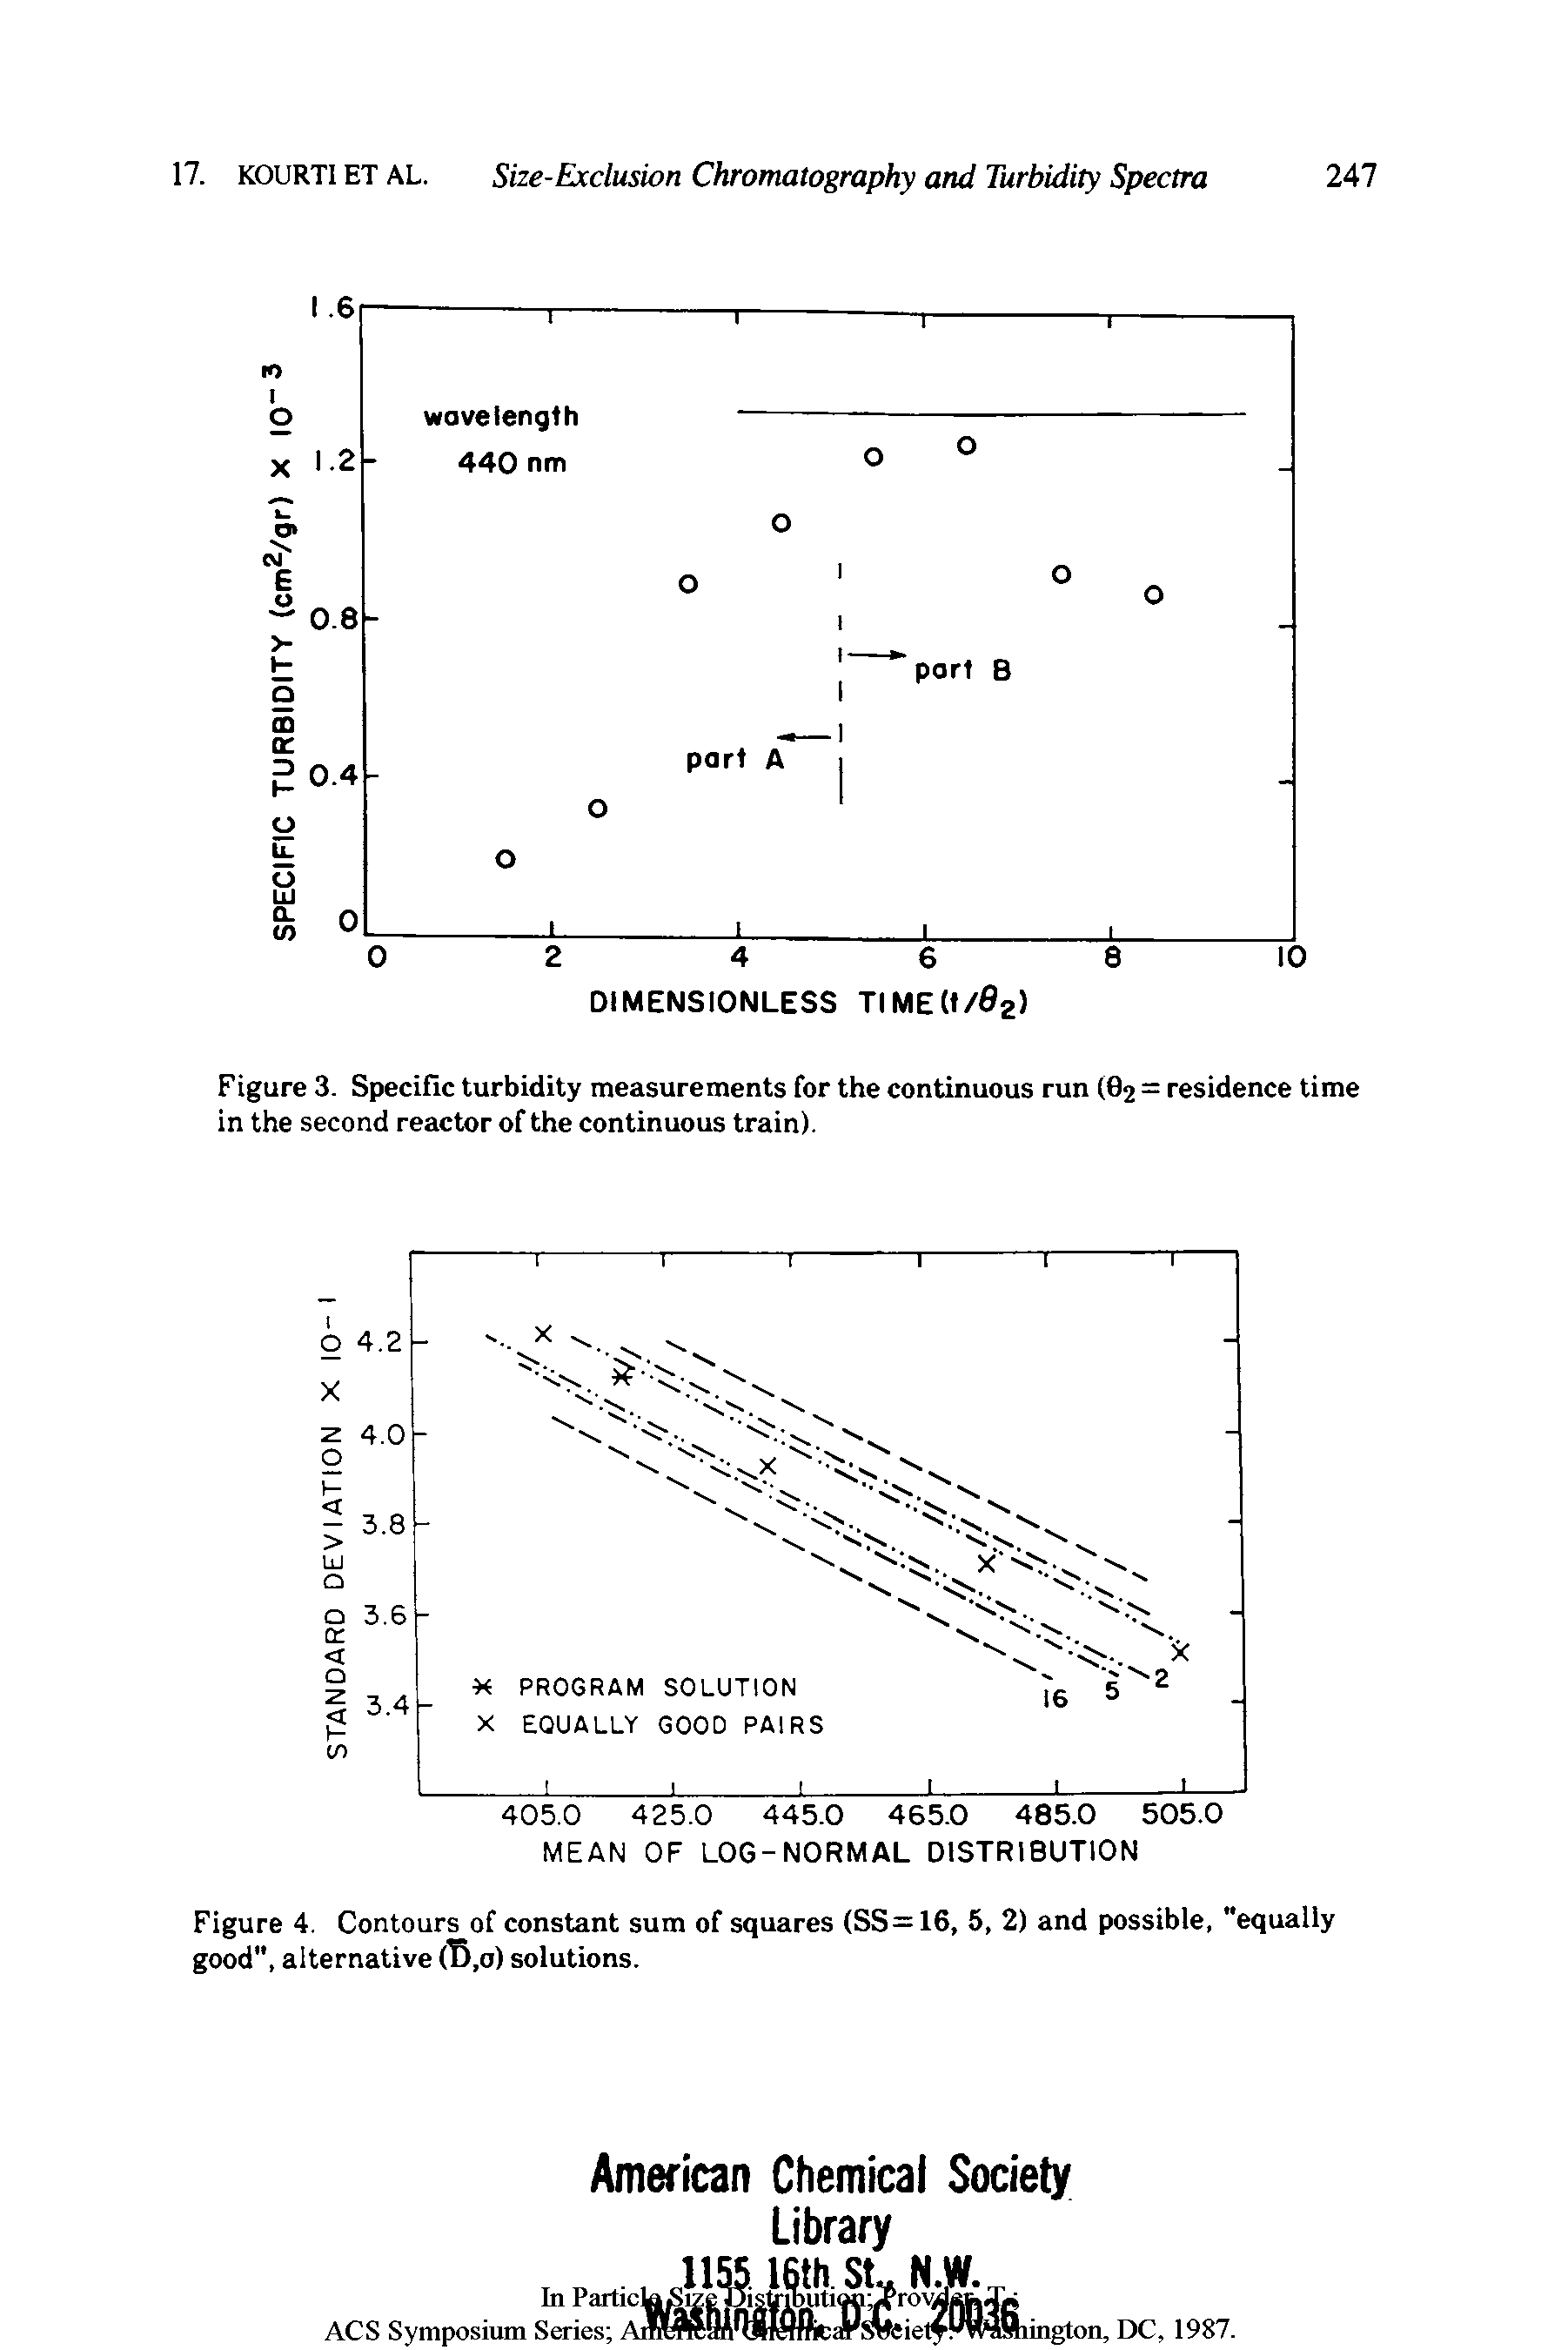 Figure 3. Specific turbidity measurements for the continuous run (02 = residence time in the second reactor of the continuous train).